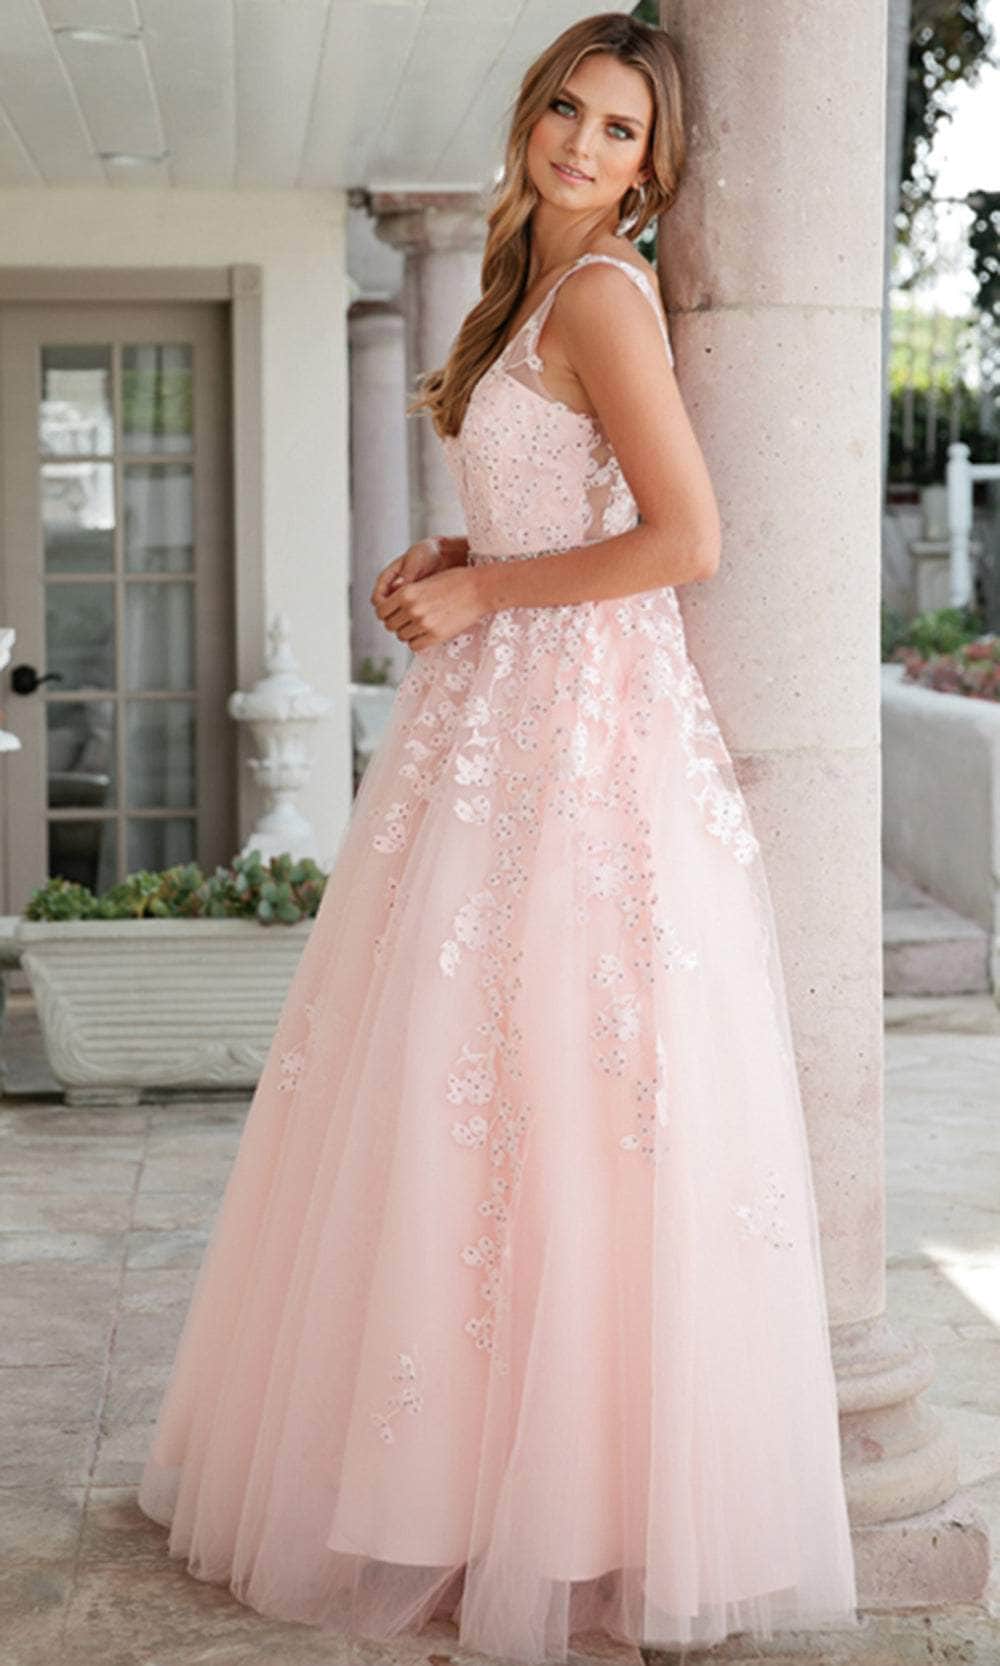 Image of Juliet Dresses 224 - Embroidered A-Line Prom Dress